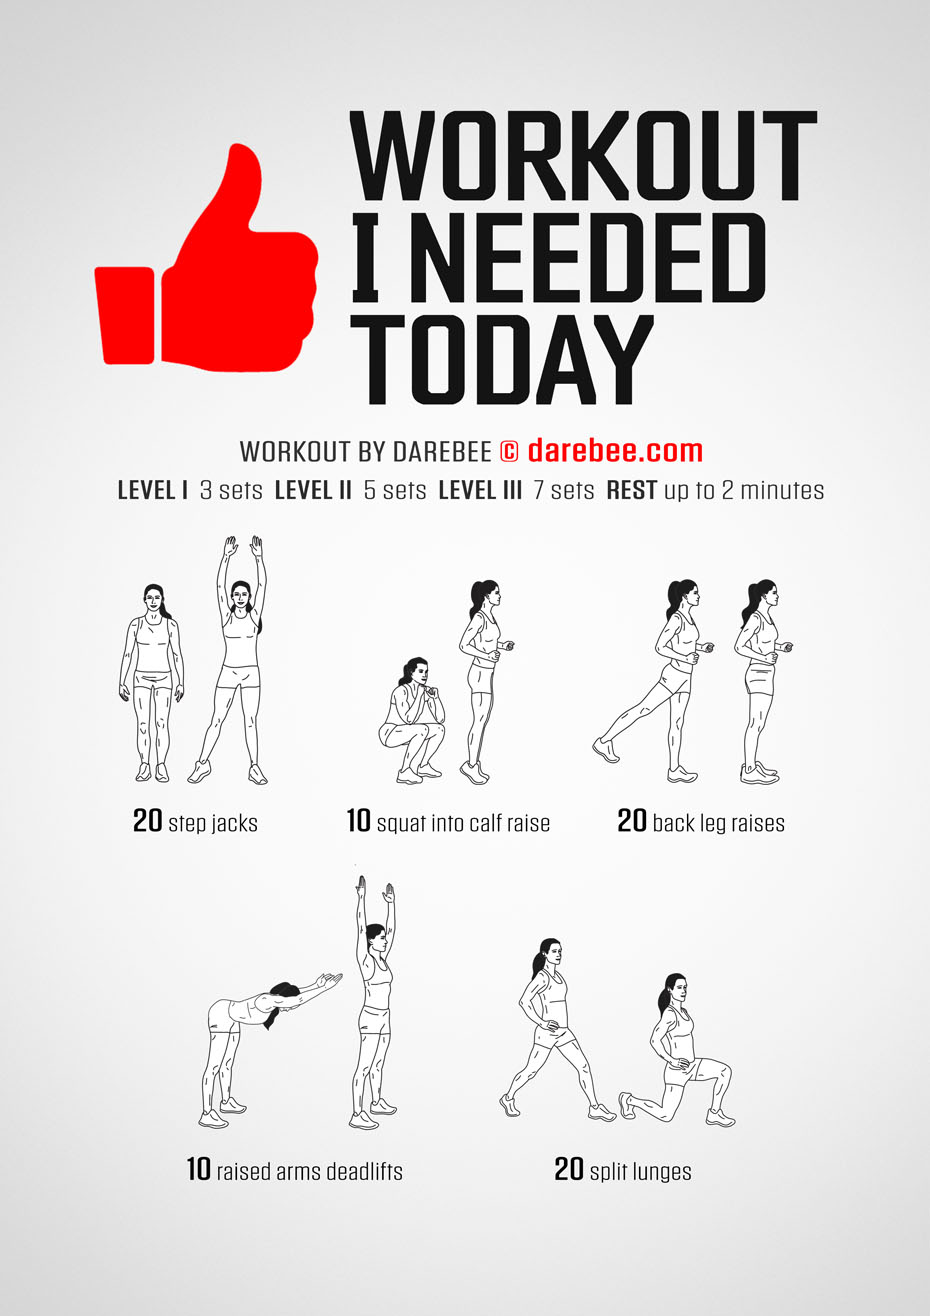 Hiit workout for women. There's 3 lower body exercises and 2 upper